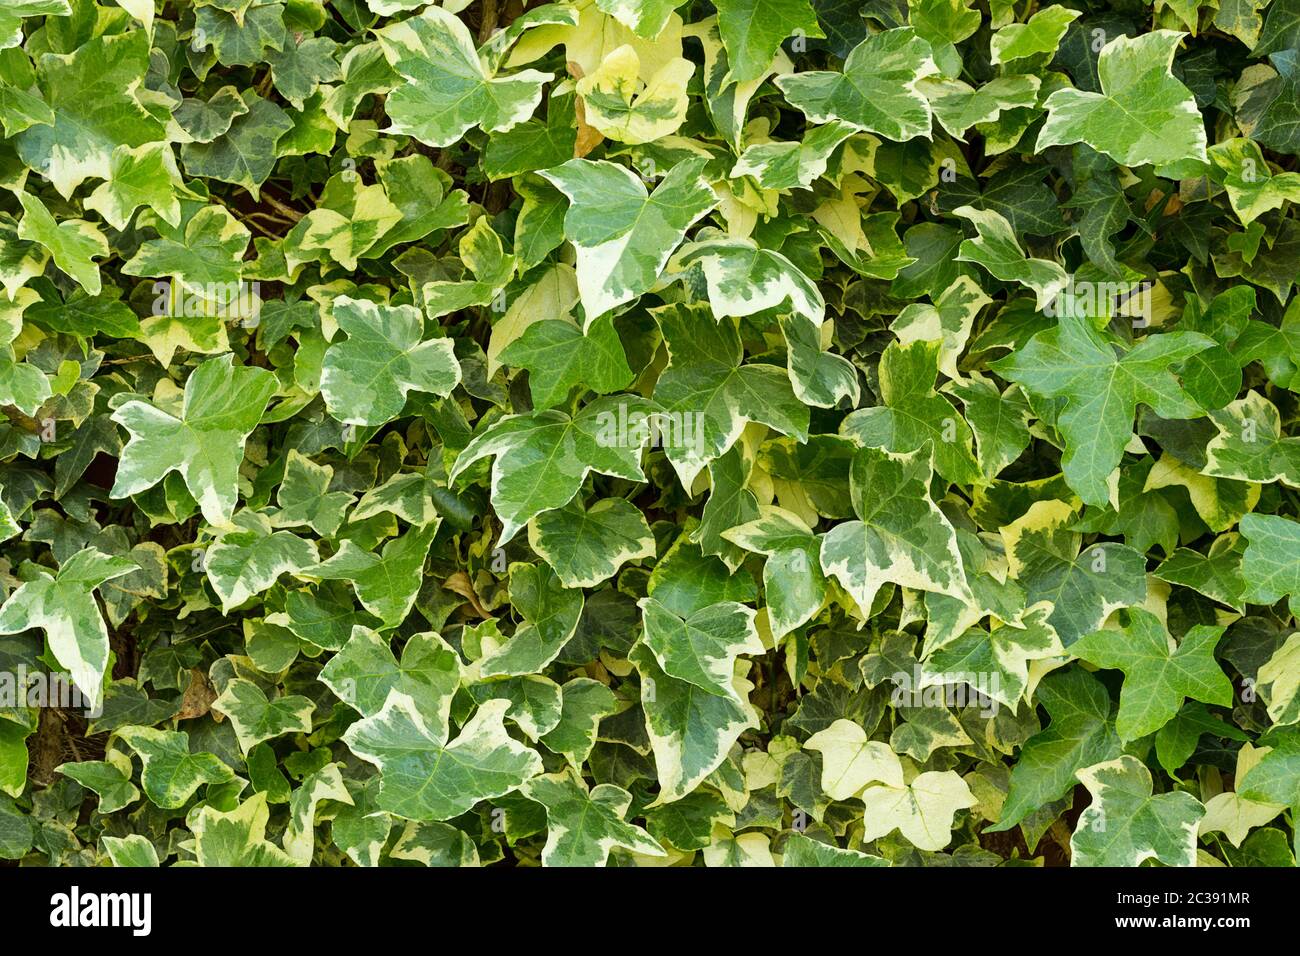 Ivy covered fence, Hedera helix, three to five lobes on none flowering stem leaves in variegated form of dark and pale green, forms climbing roots. Stock Photo